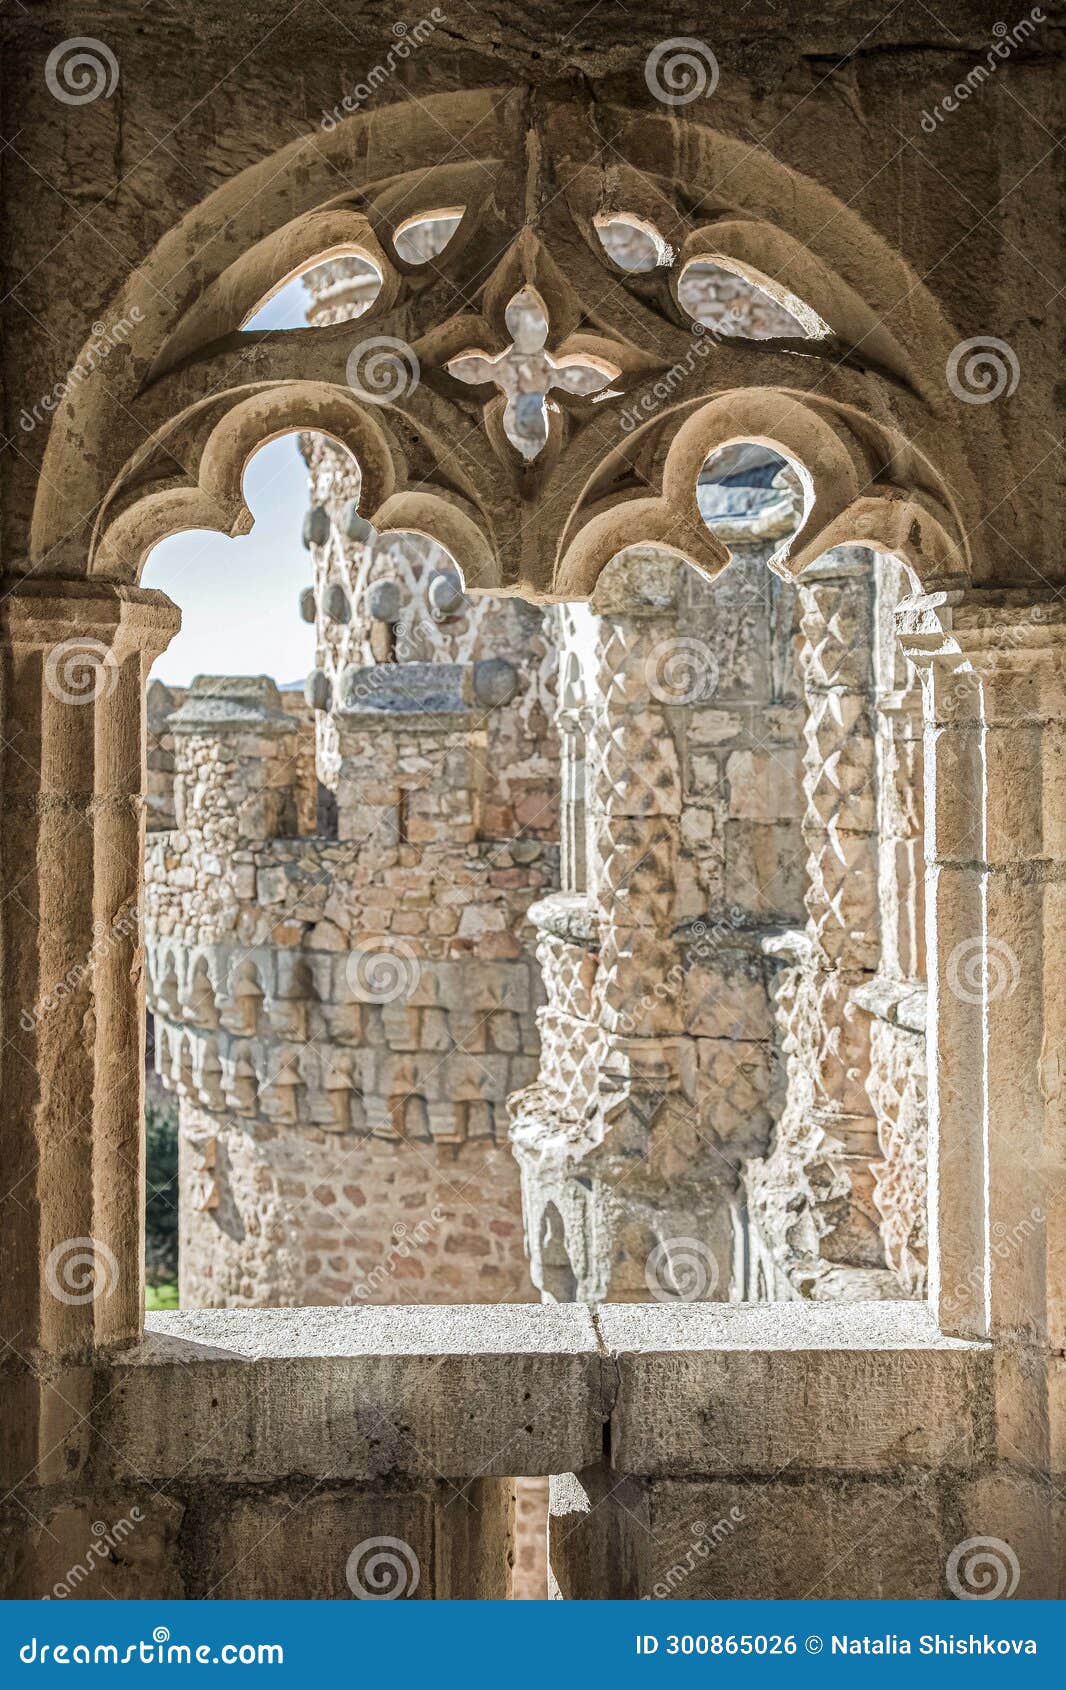 the window of the ancient medieval castle in the gothic style from which can see the beautiful carved towers of the castle.